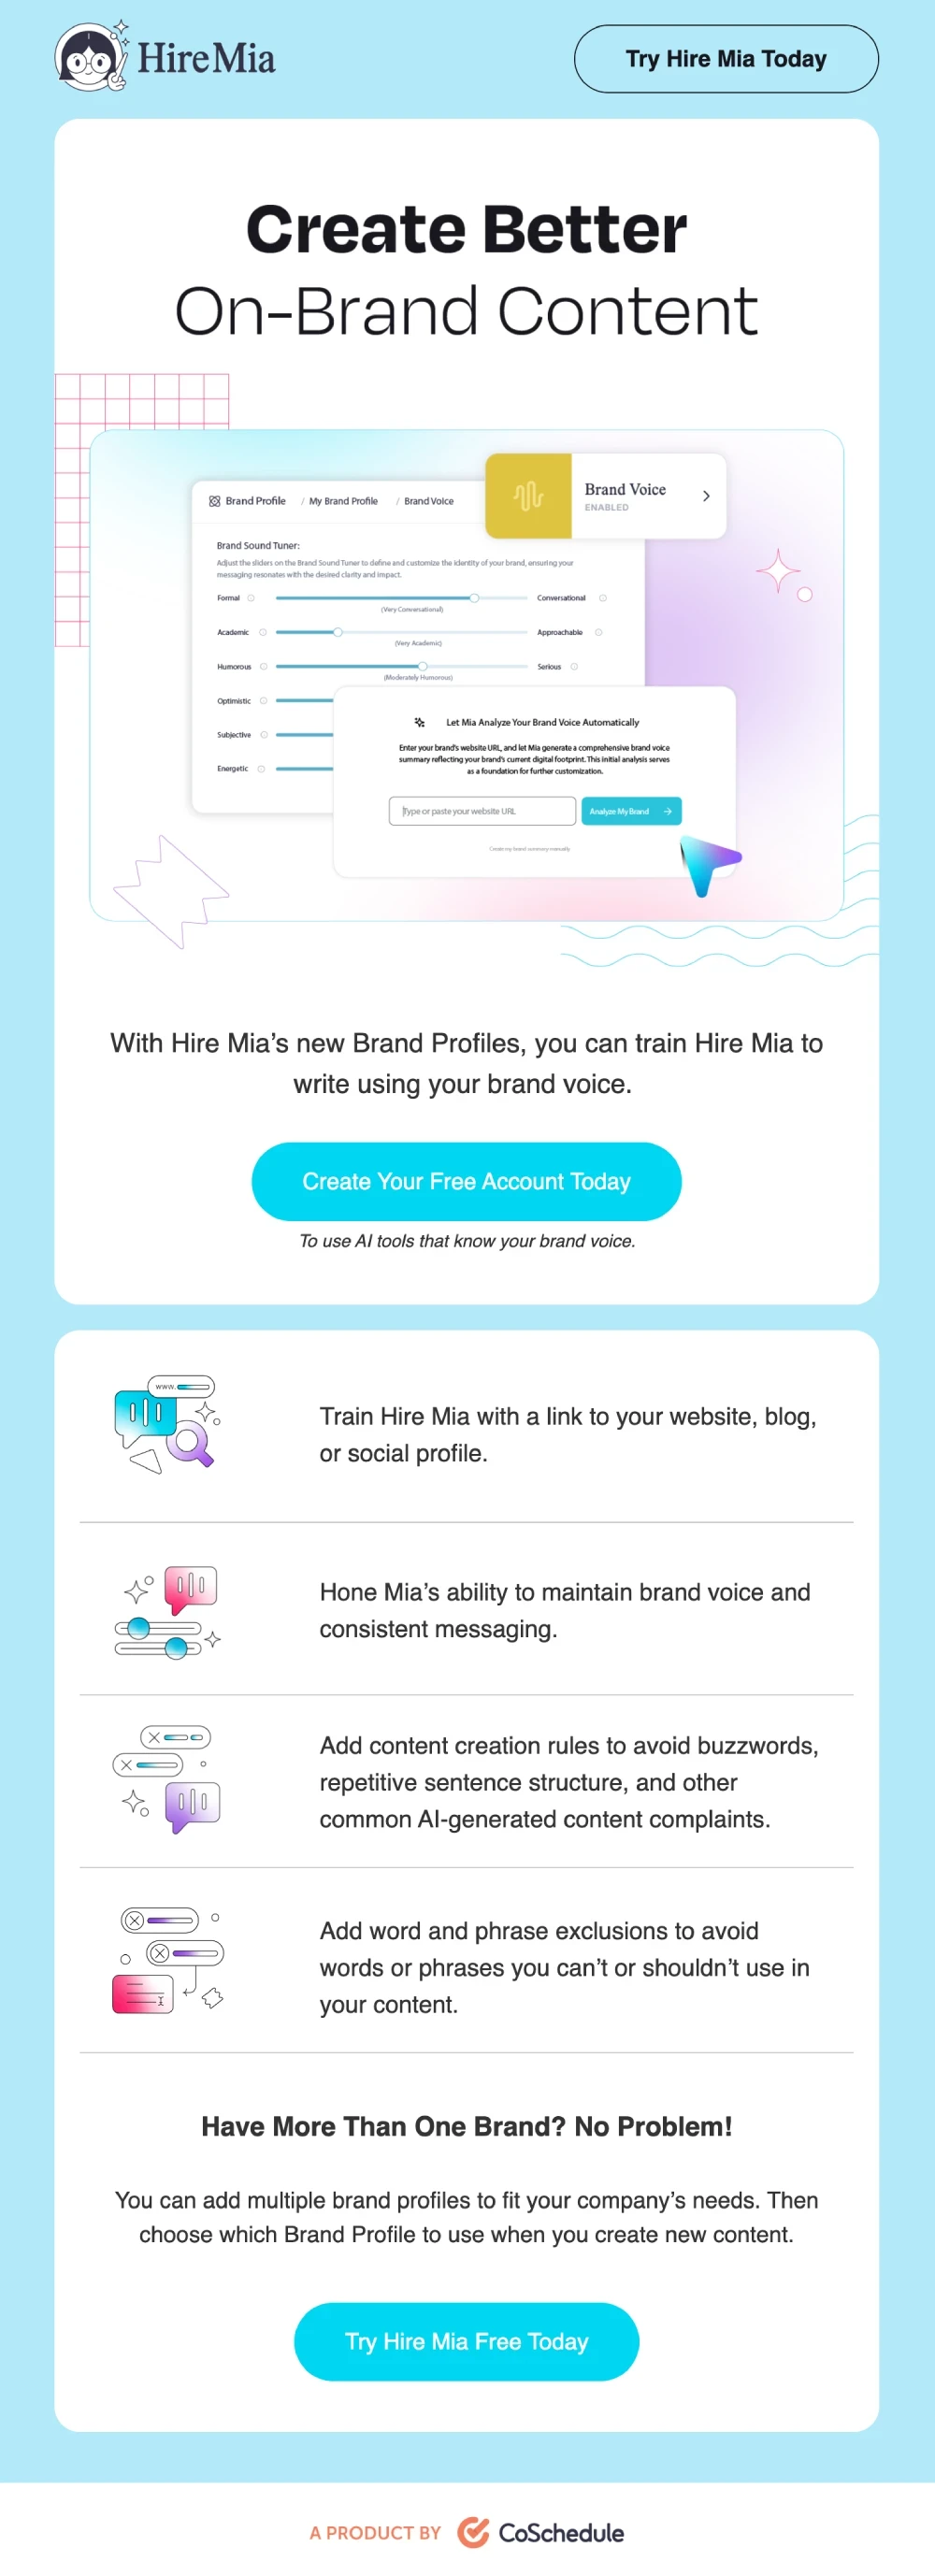 CoSchedule HireMia product launch email example.